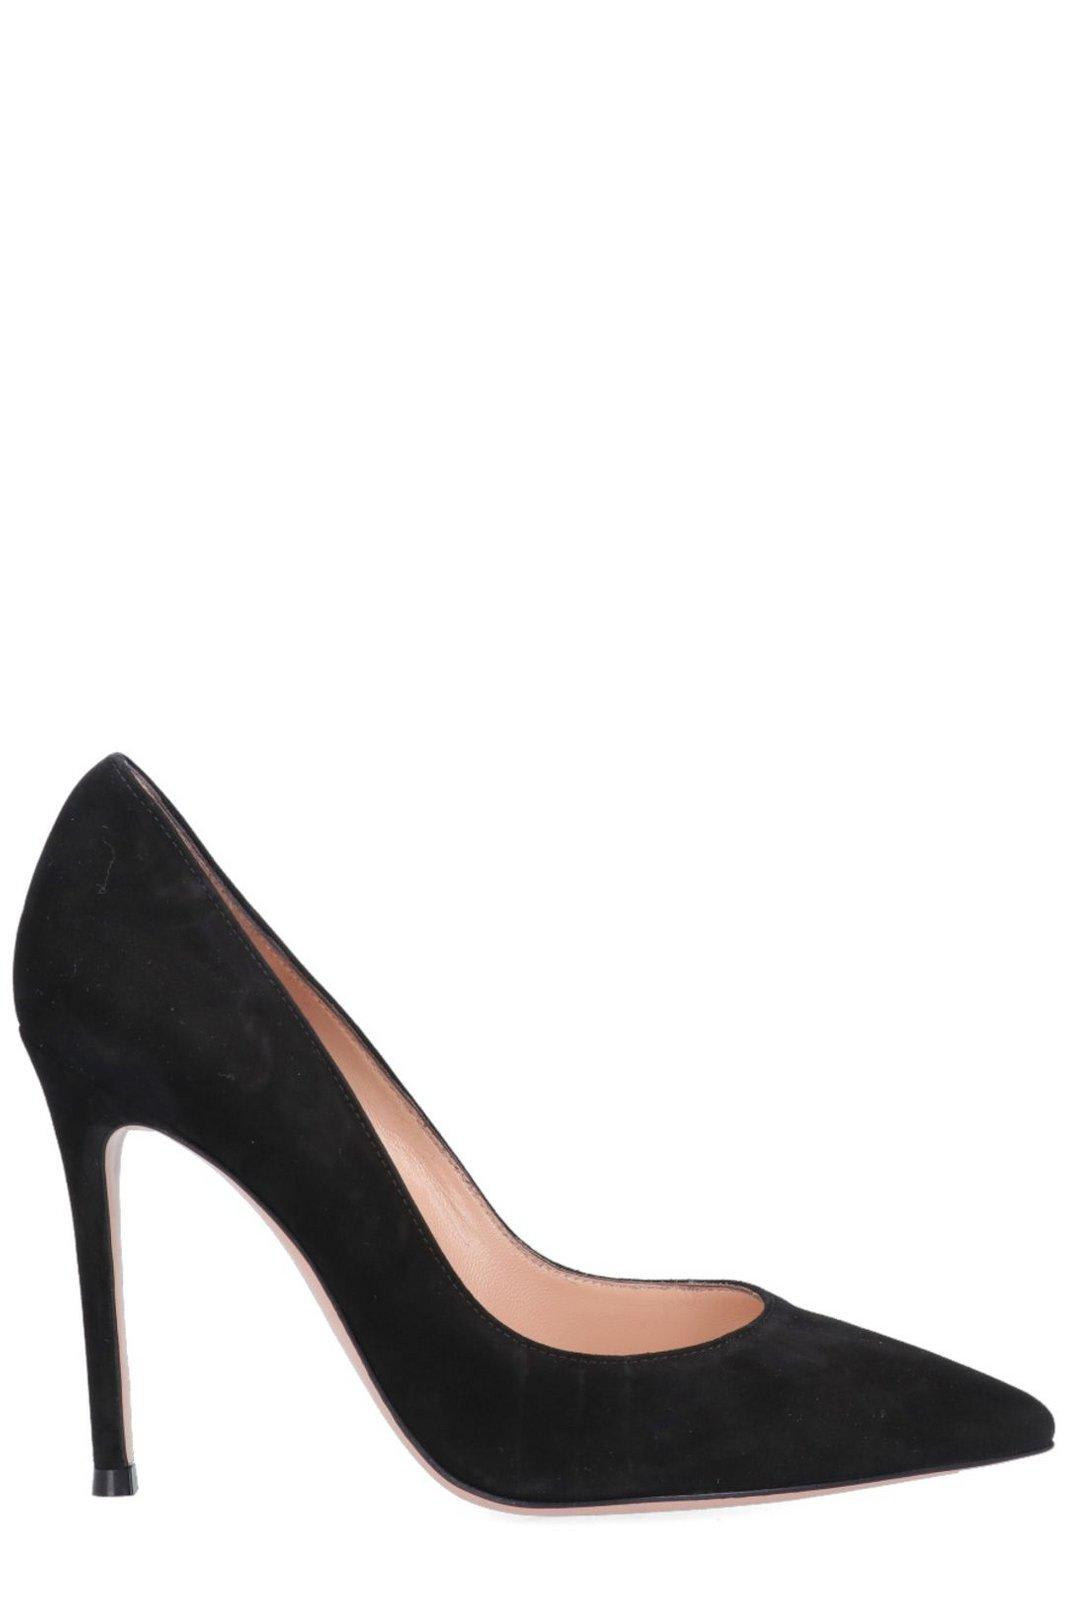 Gianvito Rossi Pointed Toe Pumps In Black